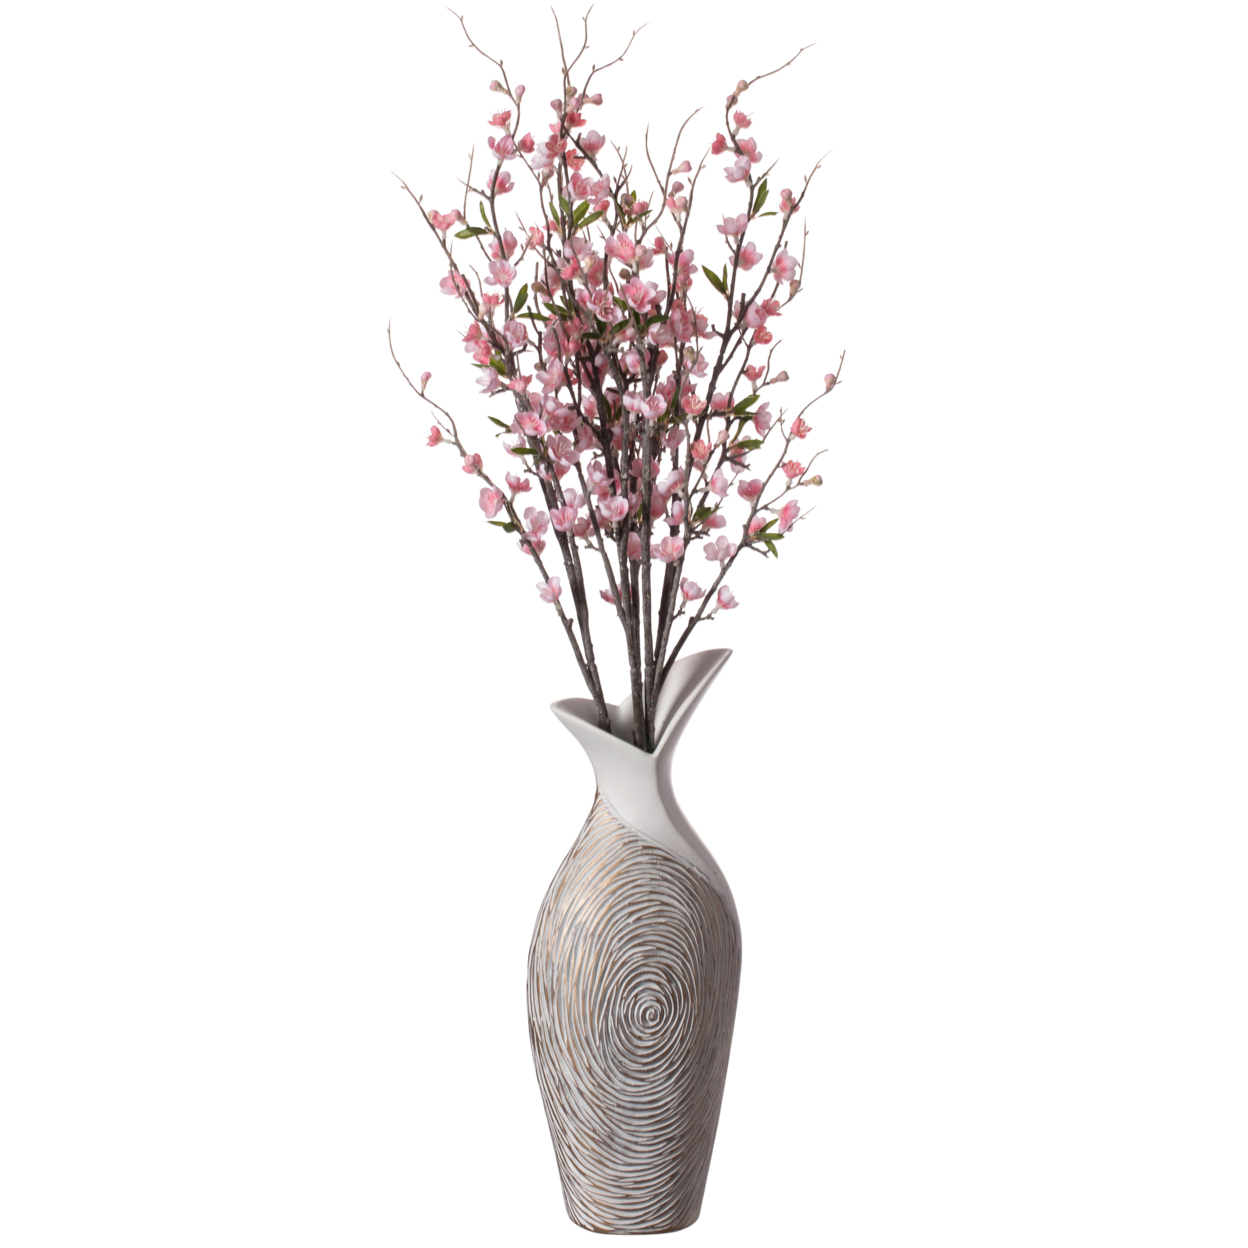 Peach Artificial Cherry Blossom Branch Stem For Home Decoration And Wedding Craft - Pink